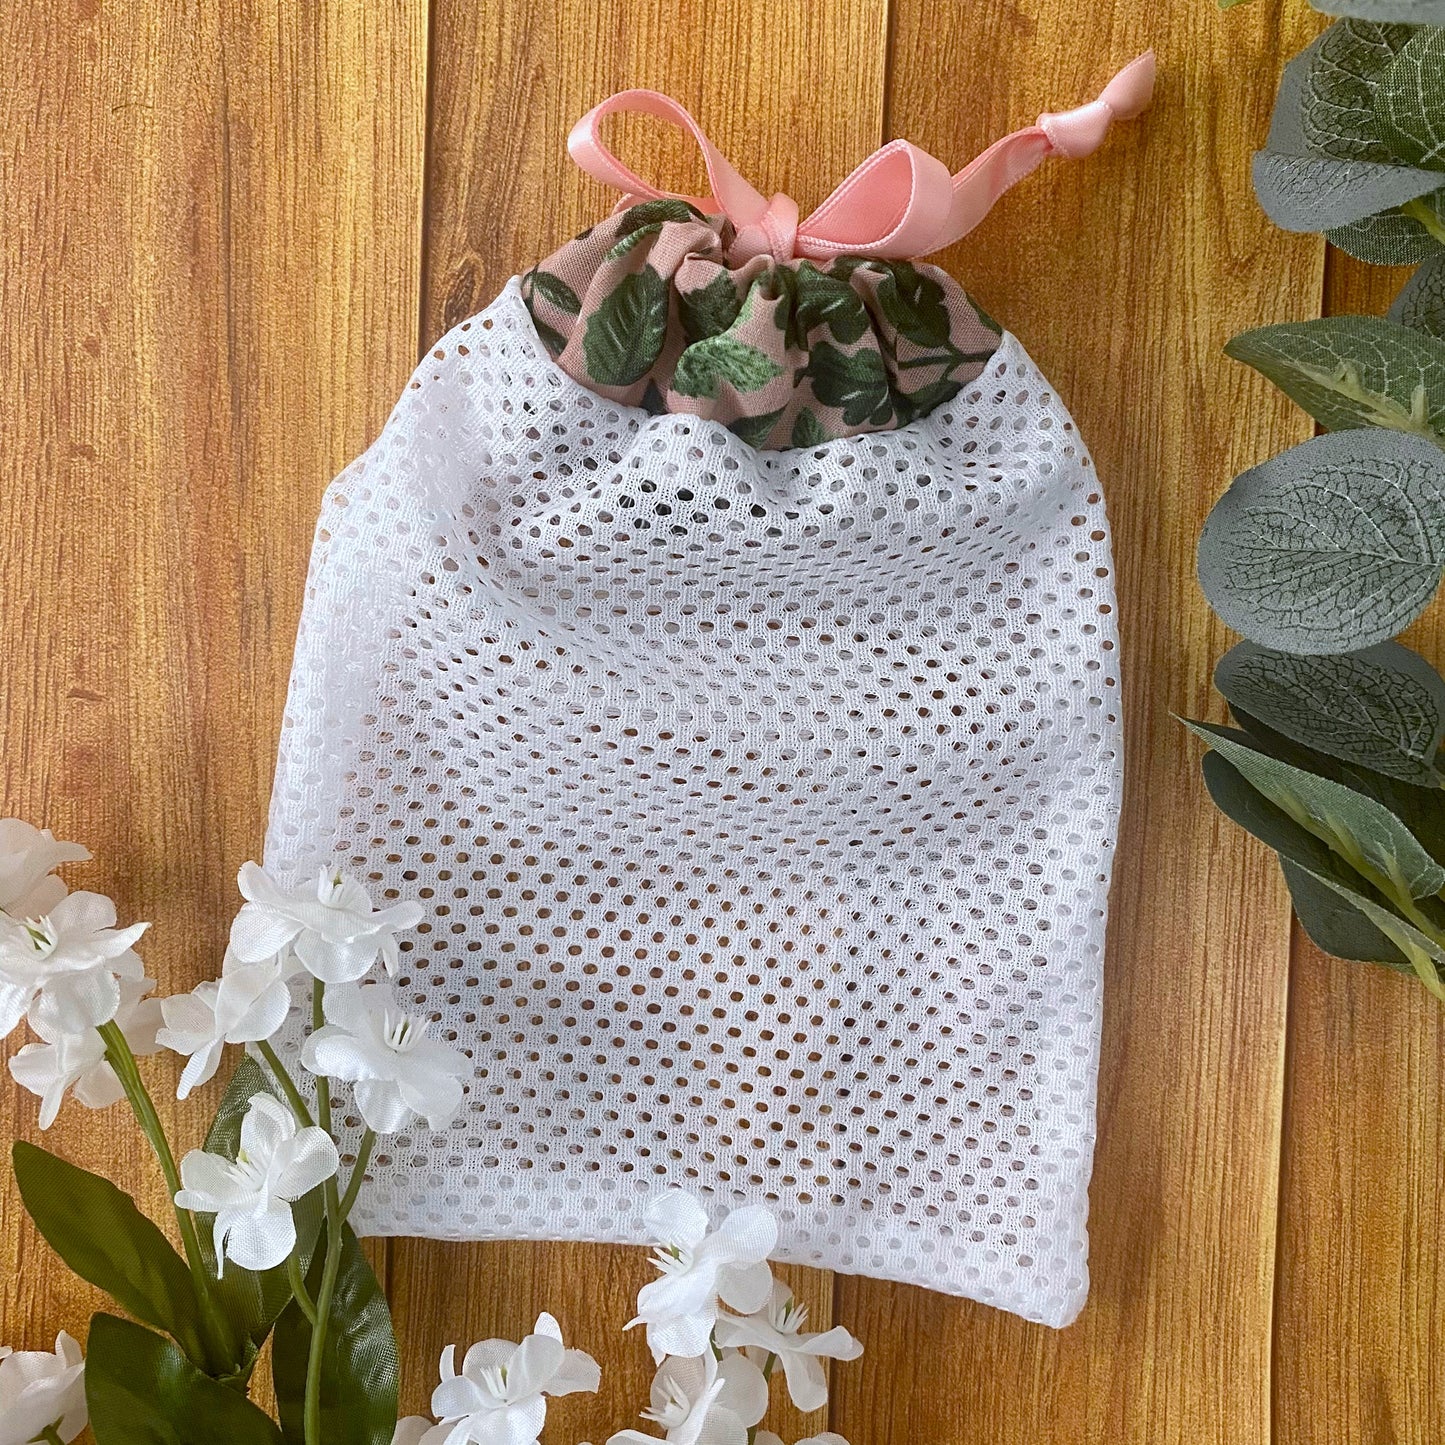 green foliage patterned washbag with white mesh on a wooden background